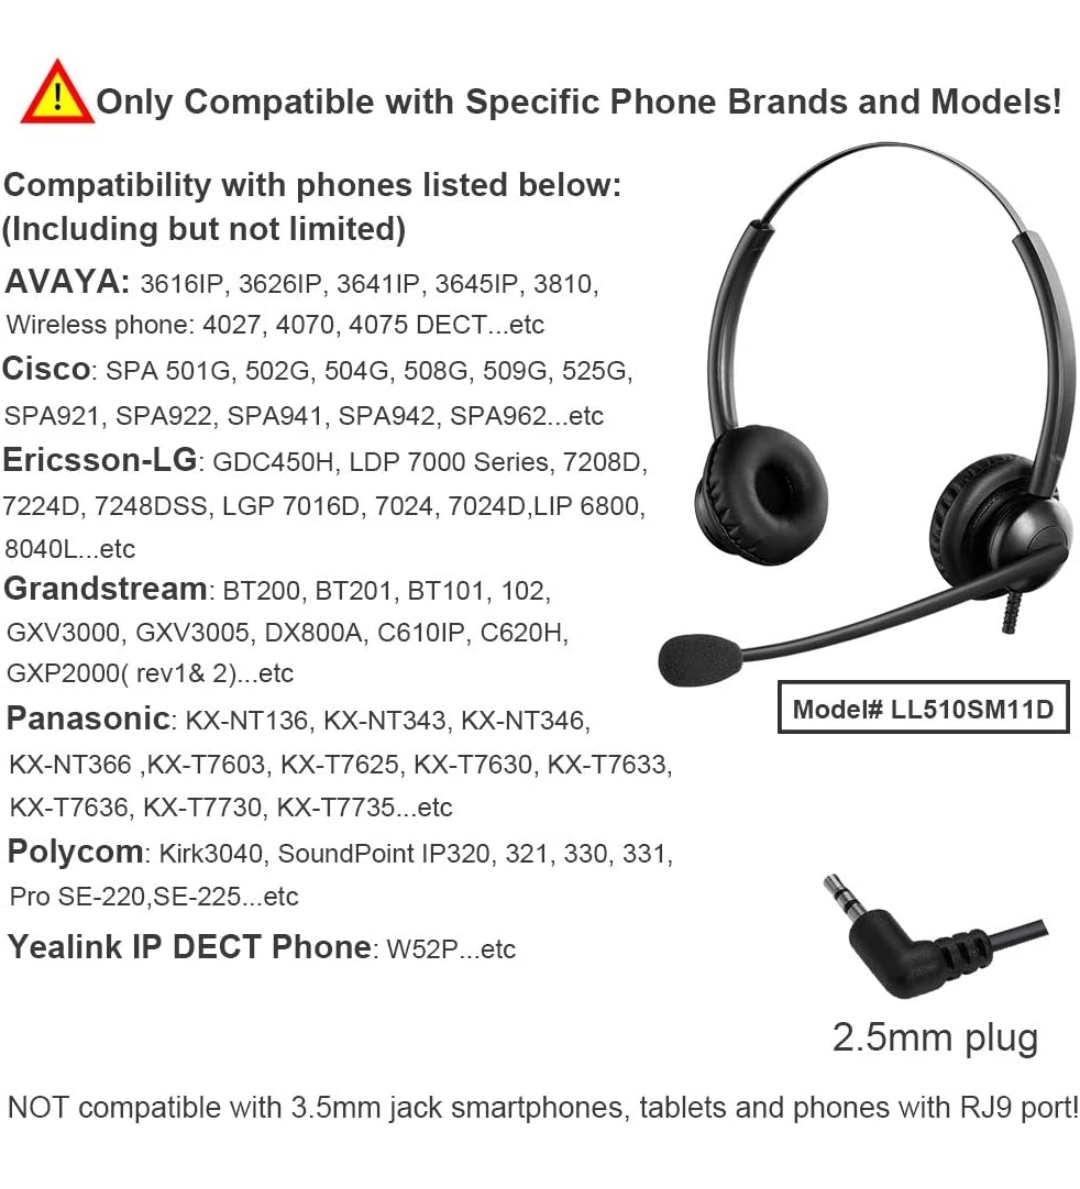 Oppetec 2.5mm Telephone Headset with Noise Cancelling Microphone